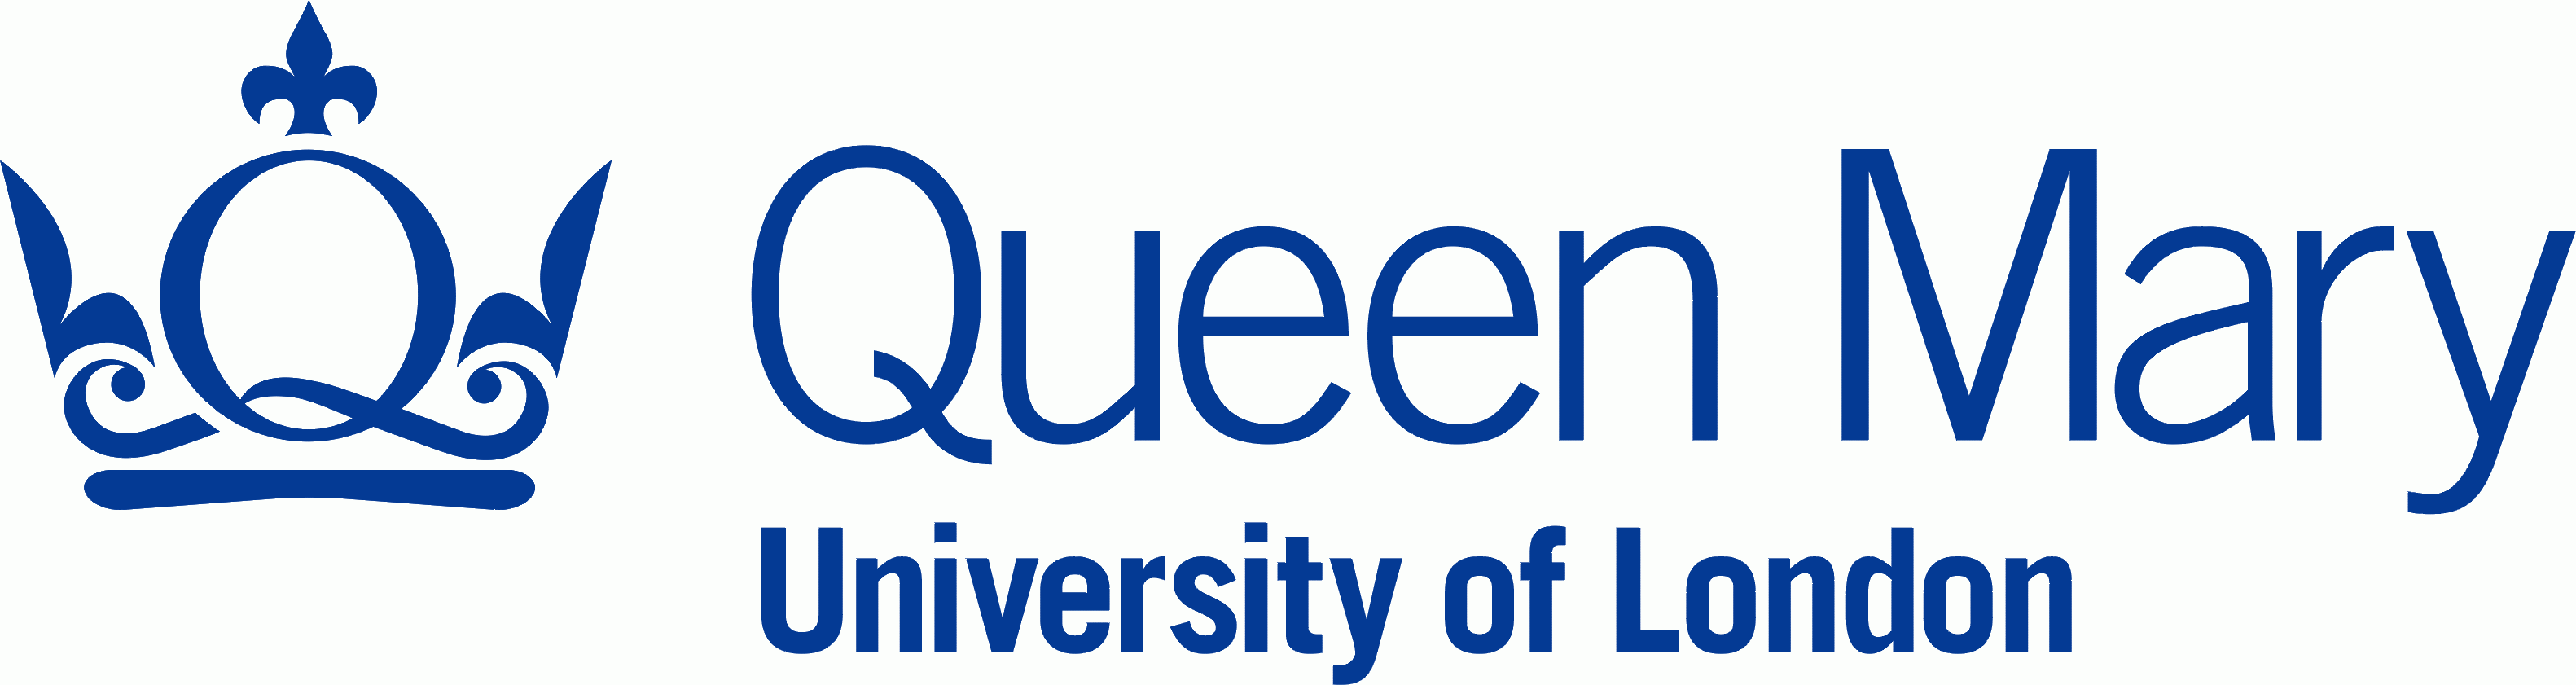 Full crest and text logo of Queen Mary, University of London. The logo with a stylised crown containing motives referencing the Lyon family and a central section shaped like the letter "Q". Both logo and text are rendered in turquoise blue